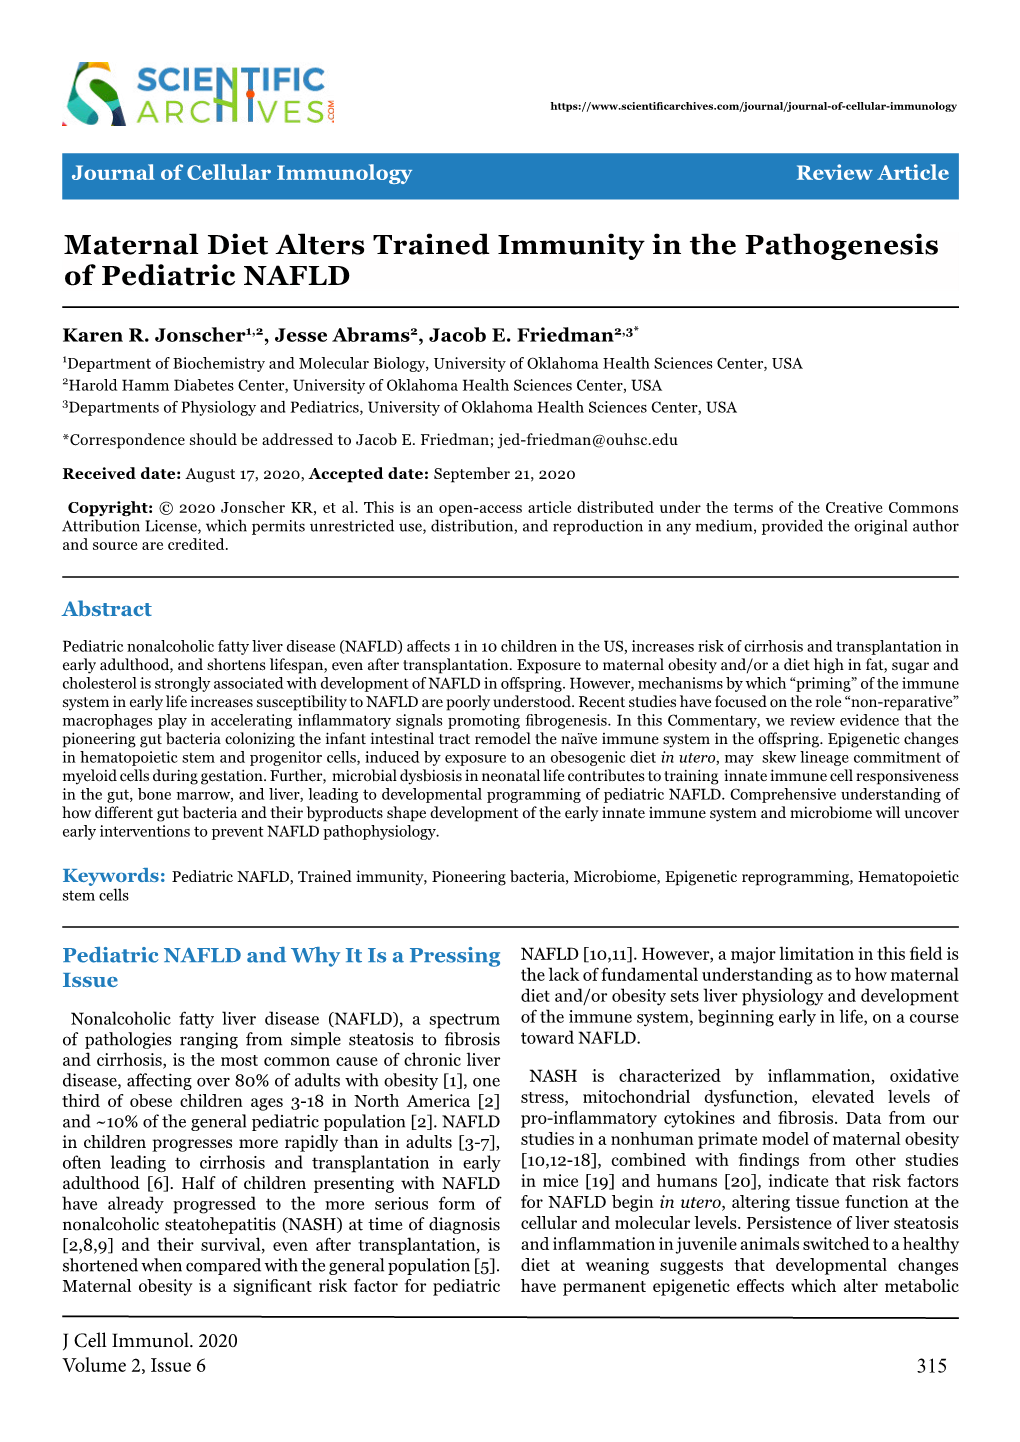 Maternal Diet Alters Trained Immunity in the Pathogenesis of Pediatric NAFLD